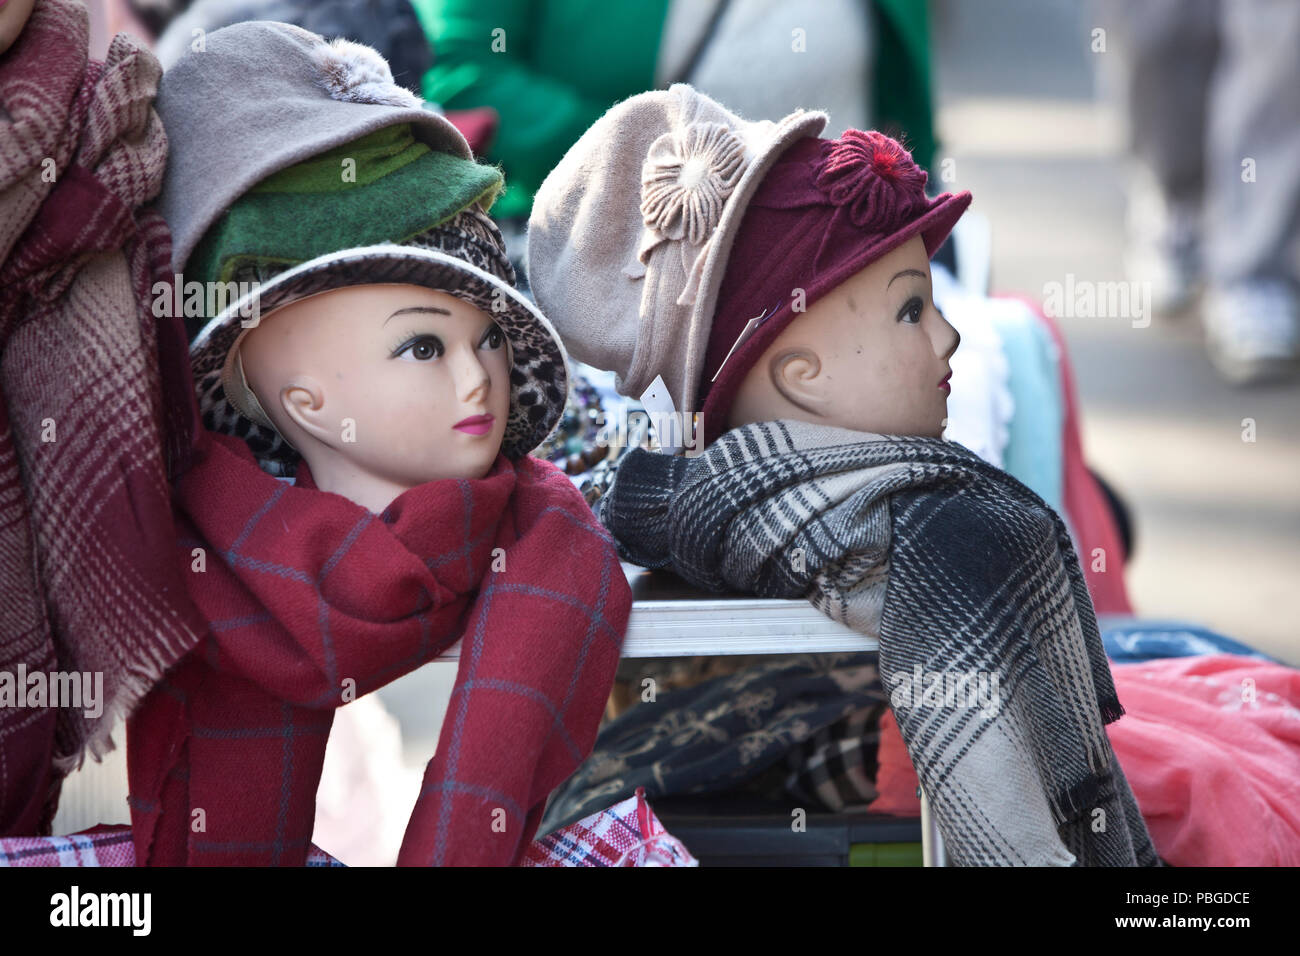 mannequins wearing hats and scarves on the street in Chinatown, New York Stock Photo